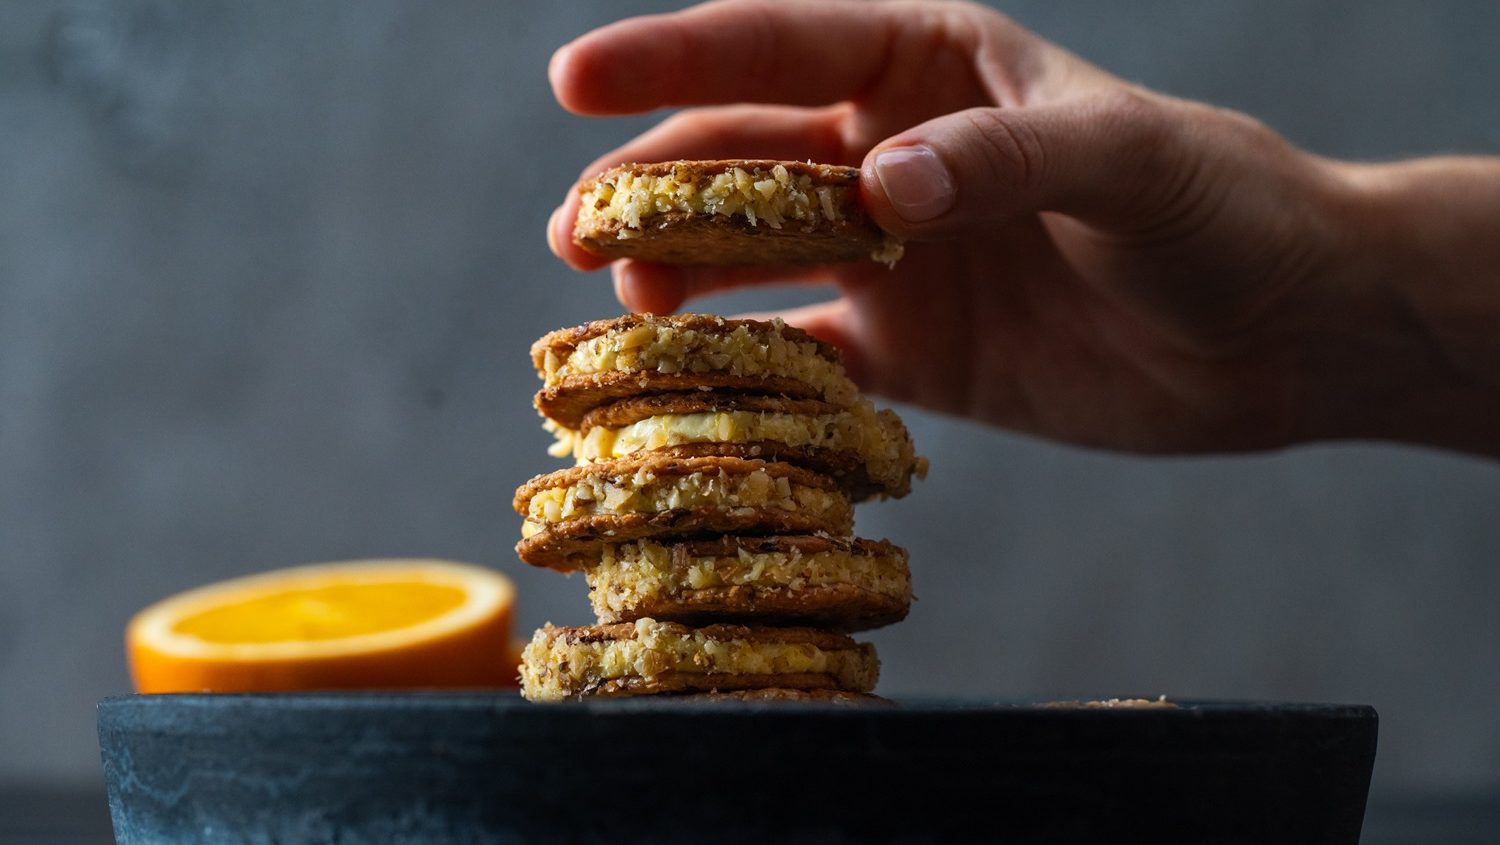 Filled round crackers stack on black slate next to cut orange, a hand is putting another cracker sandwich on top.